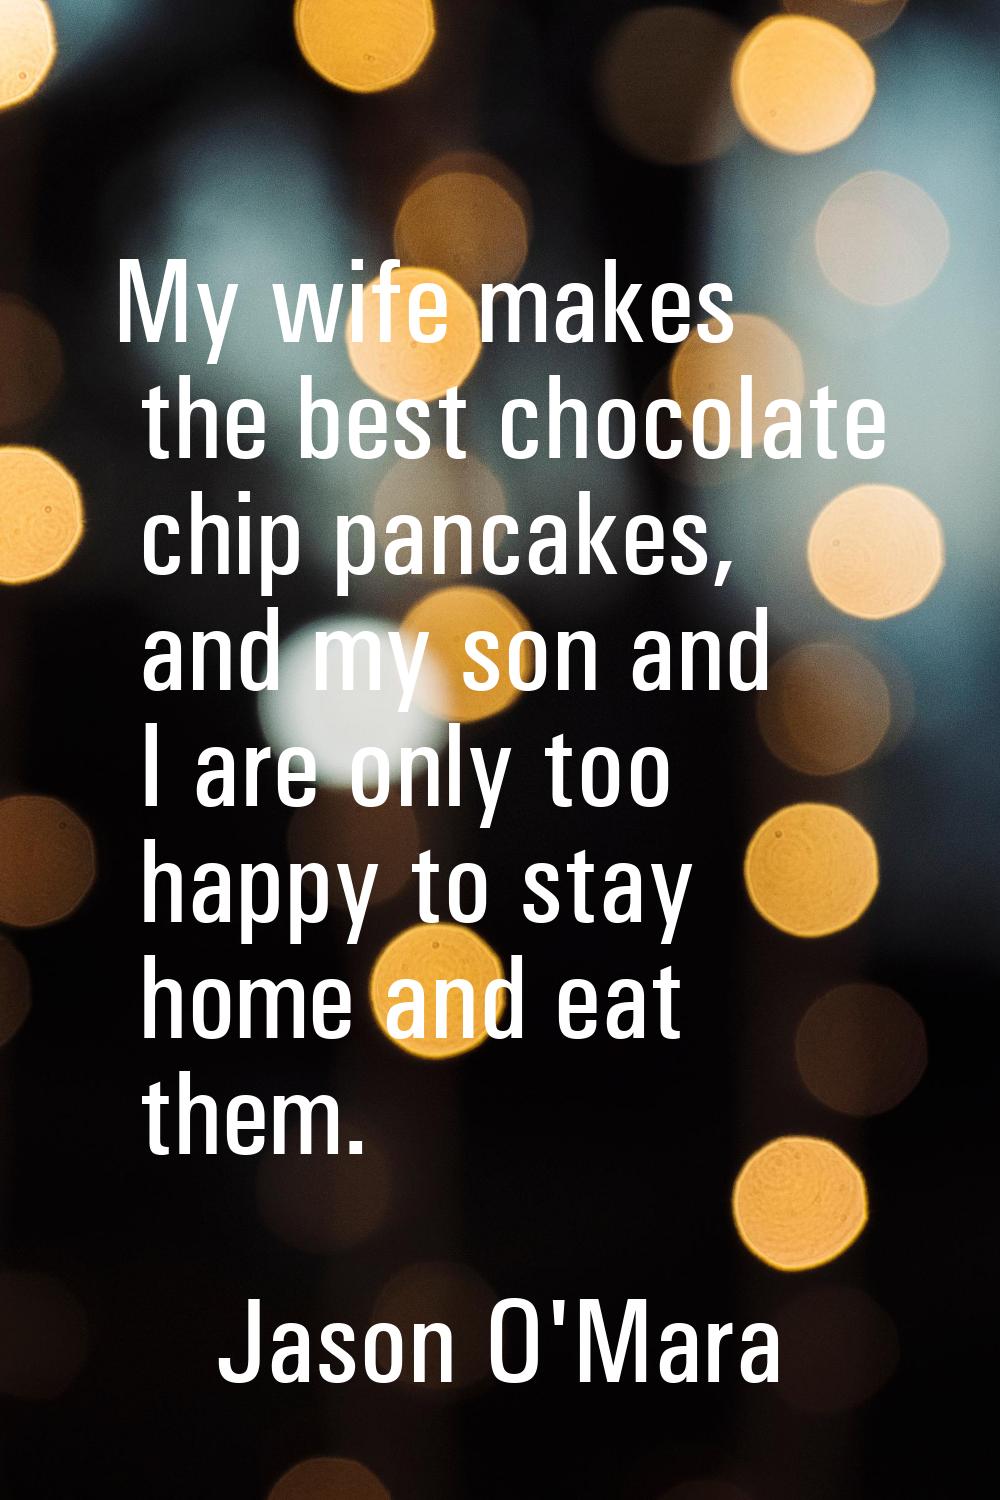 My wife makes the best chocolate chip pancakes, and my son and I are only too happy to stay home an